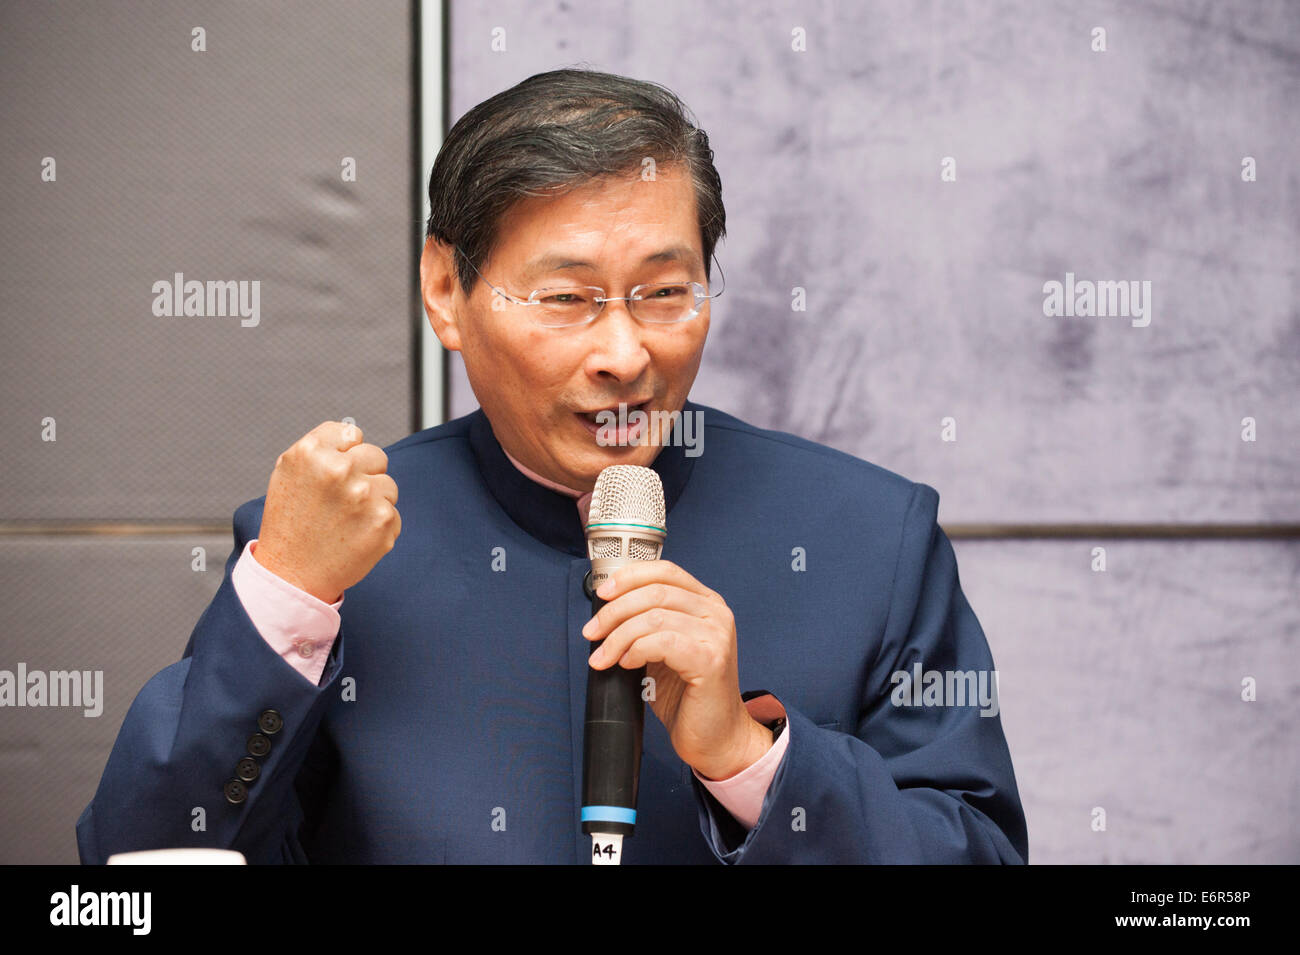 Taipei. 29th Aug, 2014. Mr. Chang An-lo, AKA “White Wolf”, leader and President of Taiwan’s political China Unification Promotion Party (Unionist Party), addresses the Taiwan Foreign Correspondents’ Club (FCC), Taipei, Taiwan, Friday, August 29, 2014.   He and his political party advocate the “peaceful unification of China and ‘one country, two systems’”.  Wanted in Taiwan since the mid-1990s, Mr. Chang An-lo returned to Taiwan in 2013 to promote unification with China as 'one country, two systems.' Credit:  Henry Westheim Photography/Alamy Live News Stock Photo